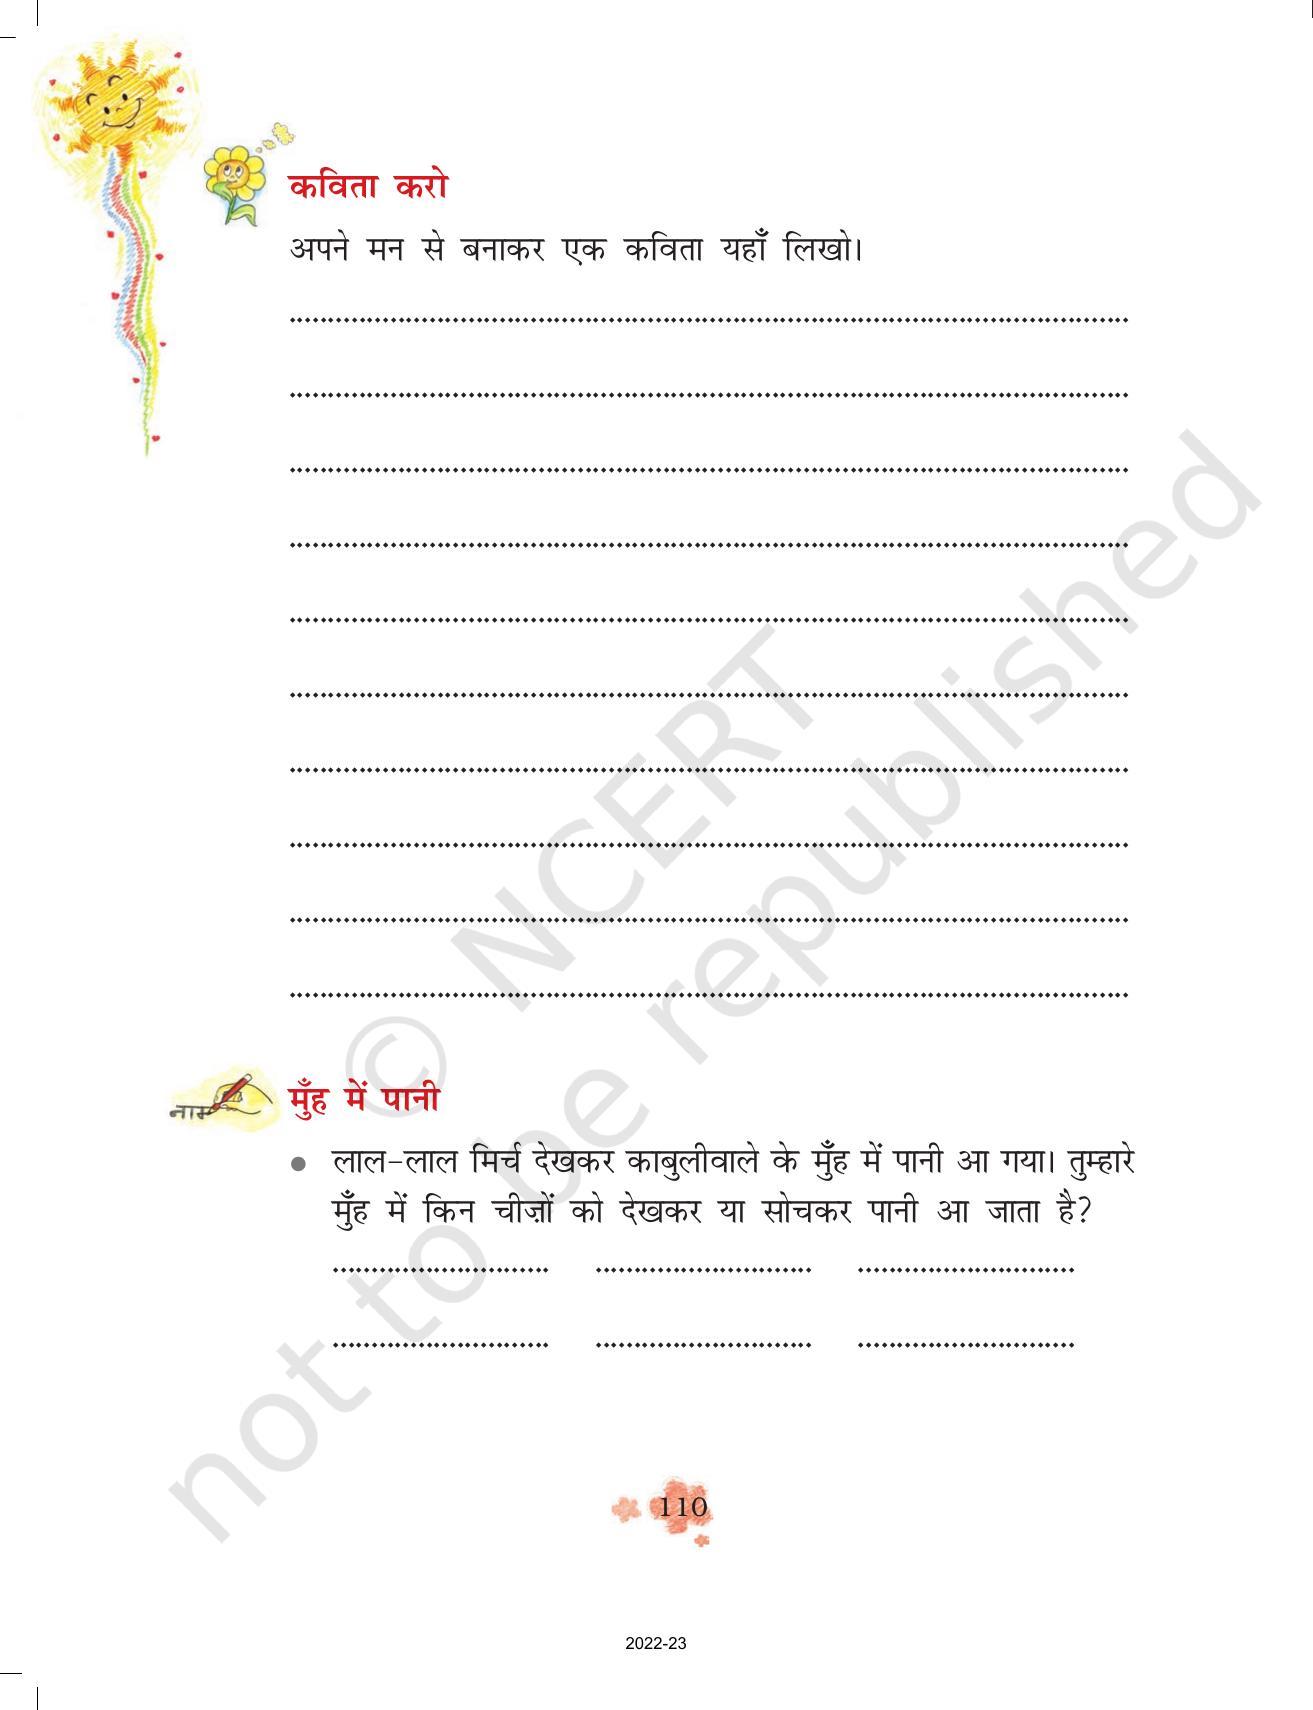 NCERT Book for Class 3 Hindi Chapter 12-मिर्च का मजा - Page 7